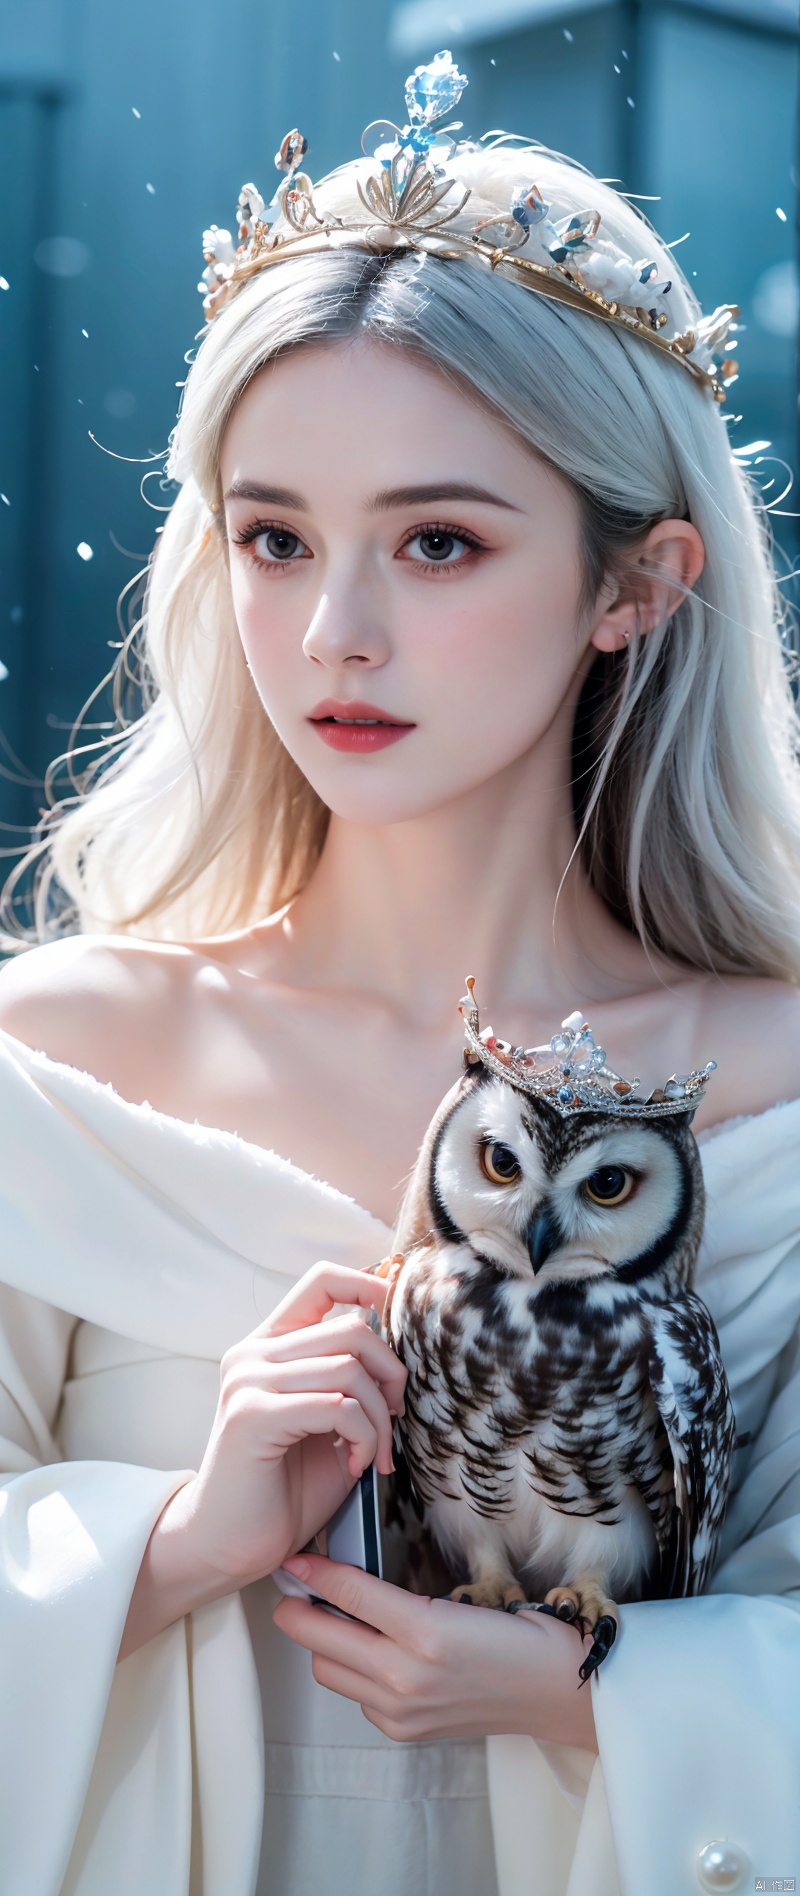 a close up of a person holding a owl on a cell phone, pale snow white skin, white witch, anna nikonova aka newmilky, with an owl on her shoulder, winter princess, 4k hd. snow white hair, beautiful animal pearl queen, karol bak of emma watson nun, owl crown, queen of winter, owl princess with crown